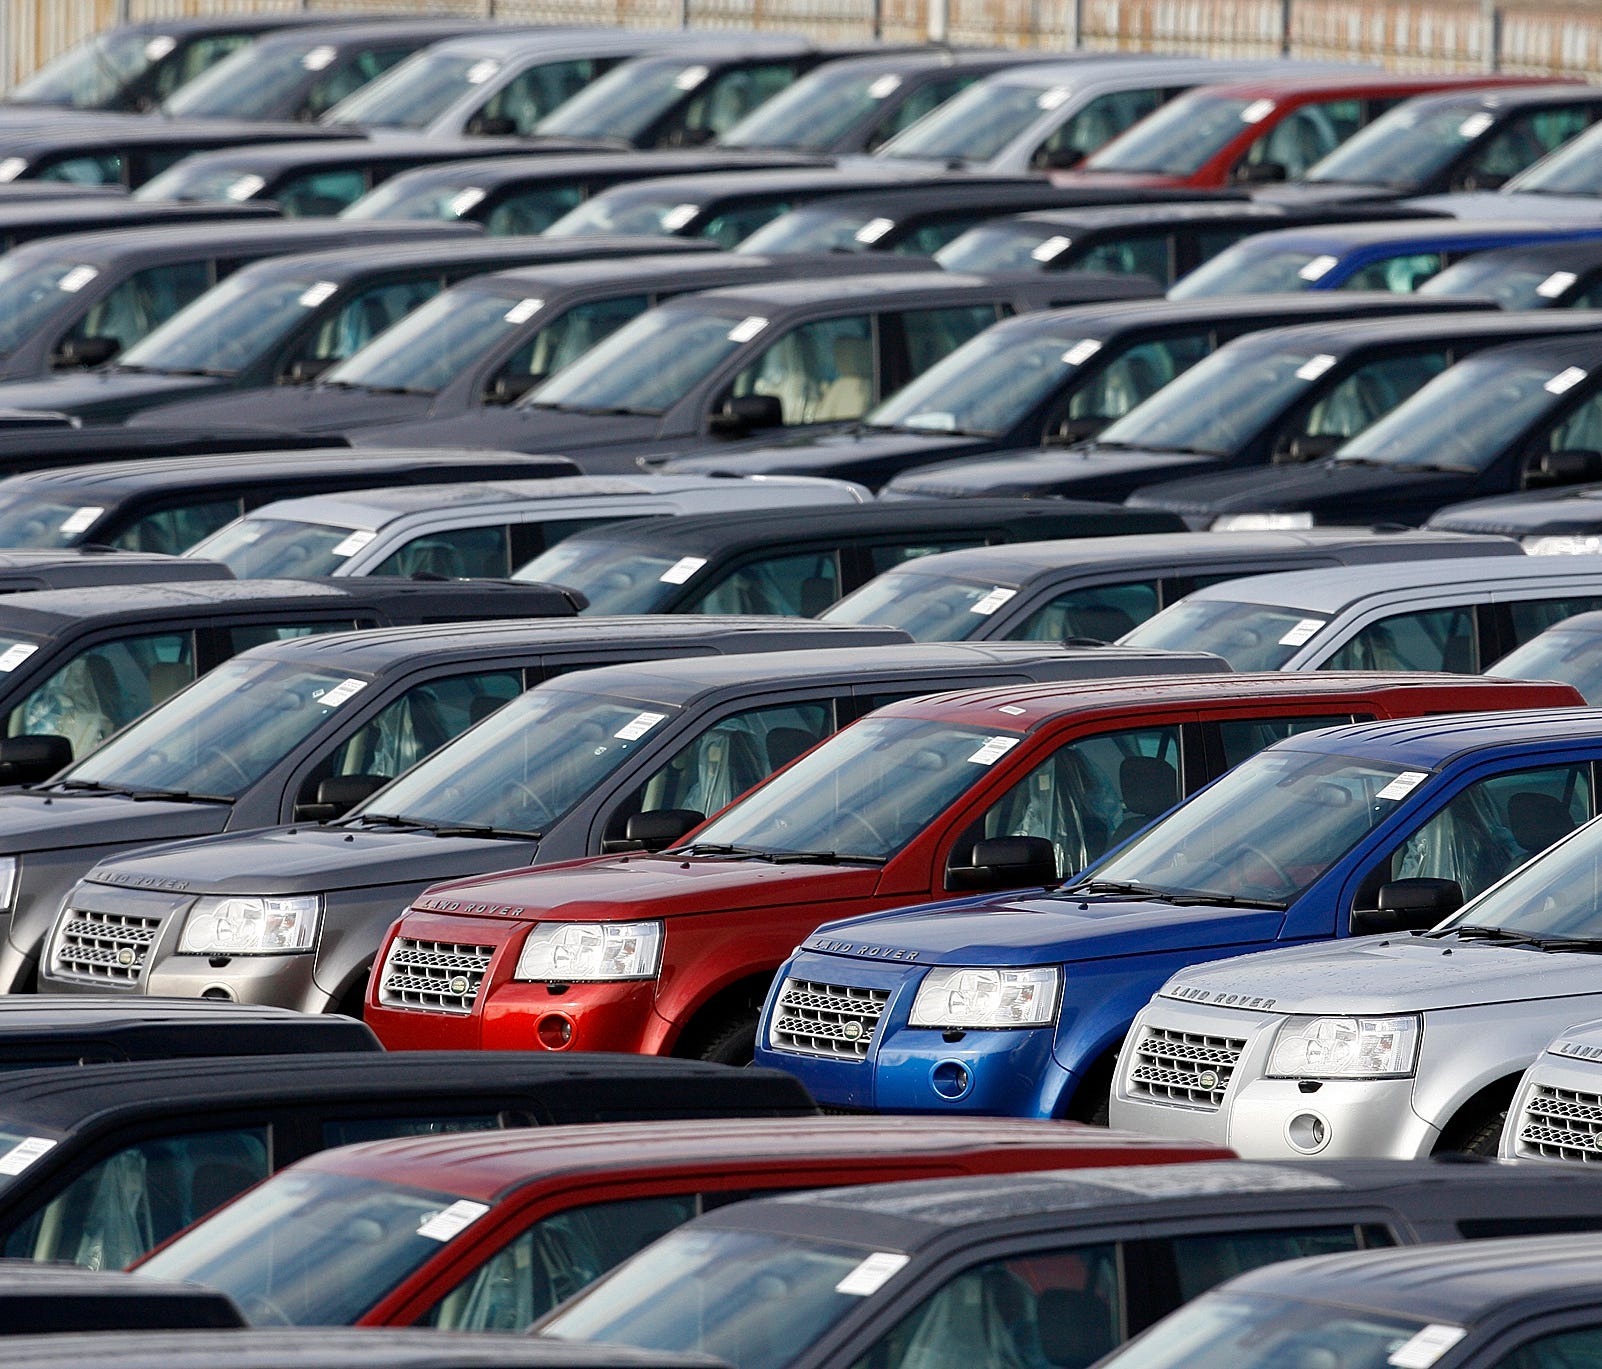 In this Friday Feb. 20, 2009 file photo, new Land Rover Freelander vehicles are stockpiled outside the Jaguar and Land Rover factory in Halewood, Liverpool, England. The British car industry association said Friday Jan. 5, 2017, that automobile sales